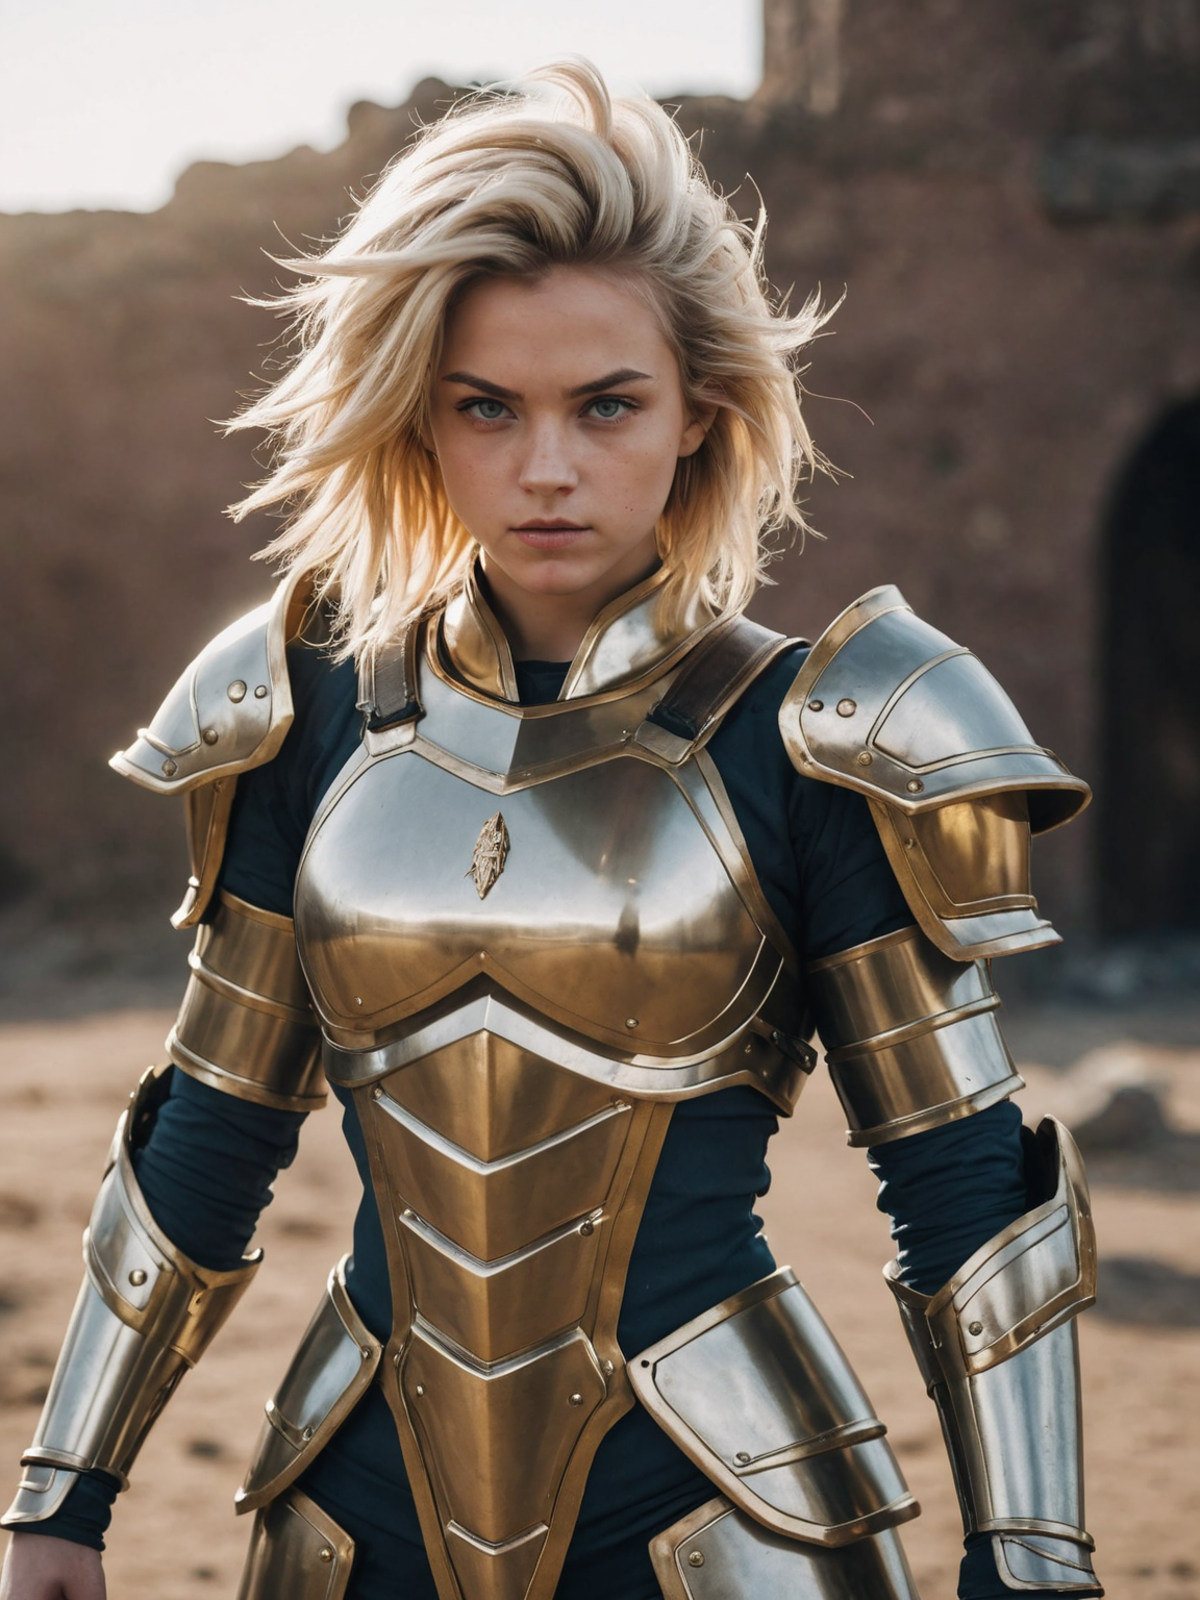 A blonde woman wearing a gold armor and a sword.